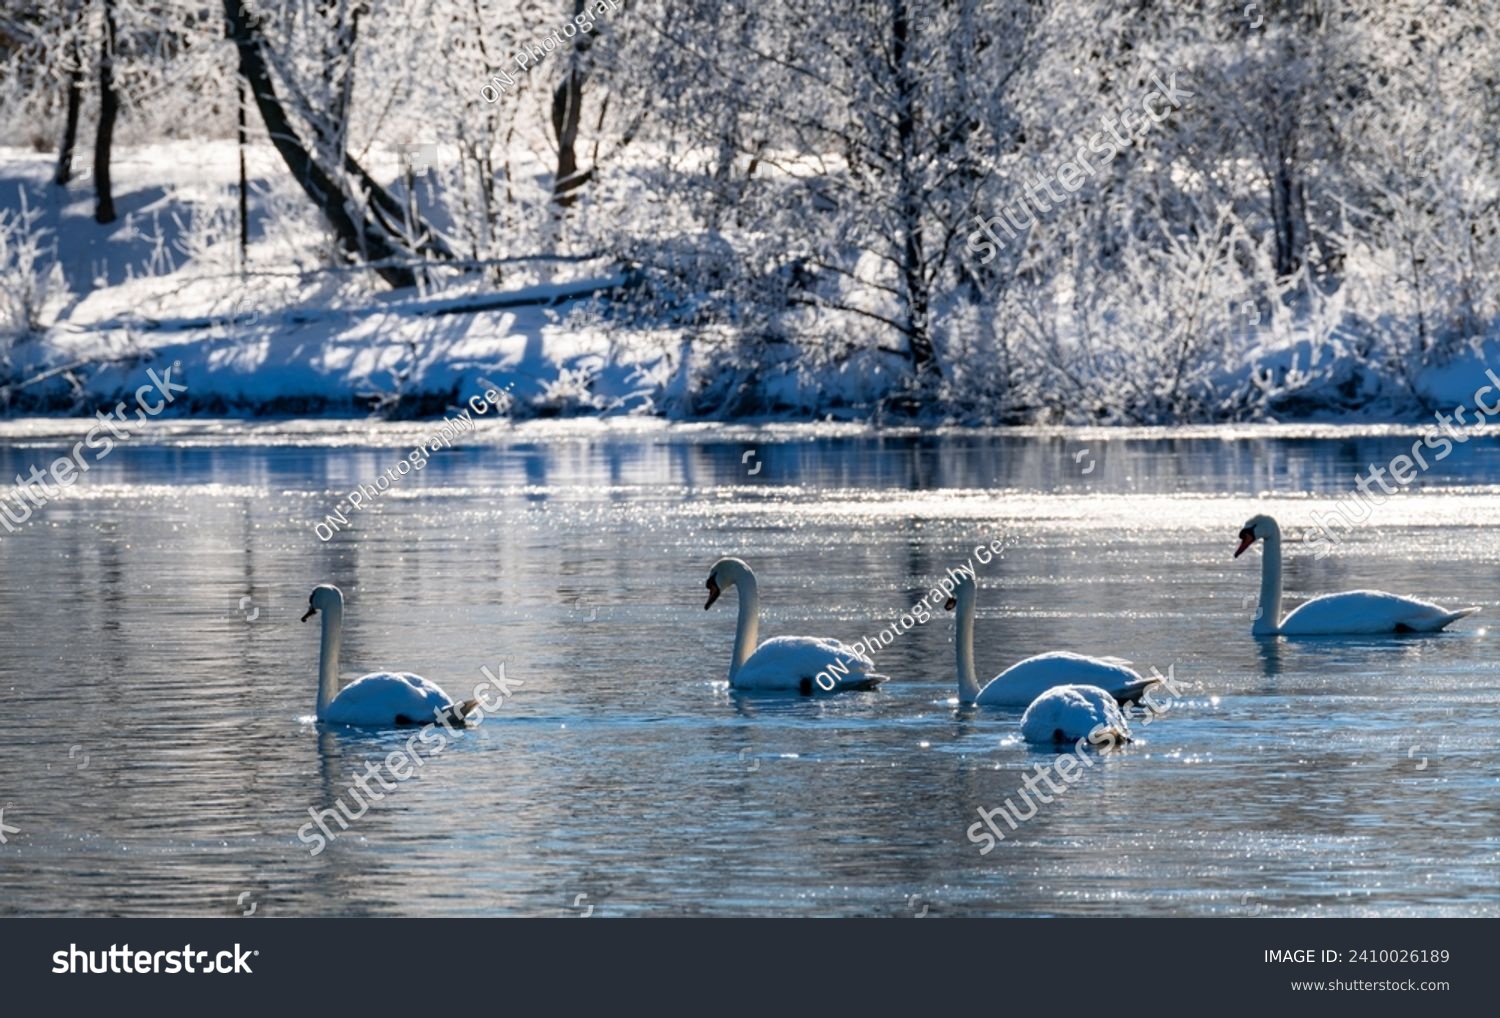 Flock of 5 swans (Cygnus olor) gliding on freezing calm water of ice cold river Ruhr in Sauerland Germany on a cold winters morning. Snowy and romantic scenery with bright sunlight and wild water fowl #2410026189